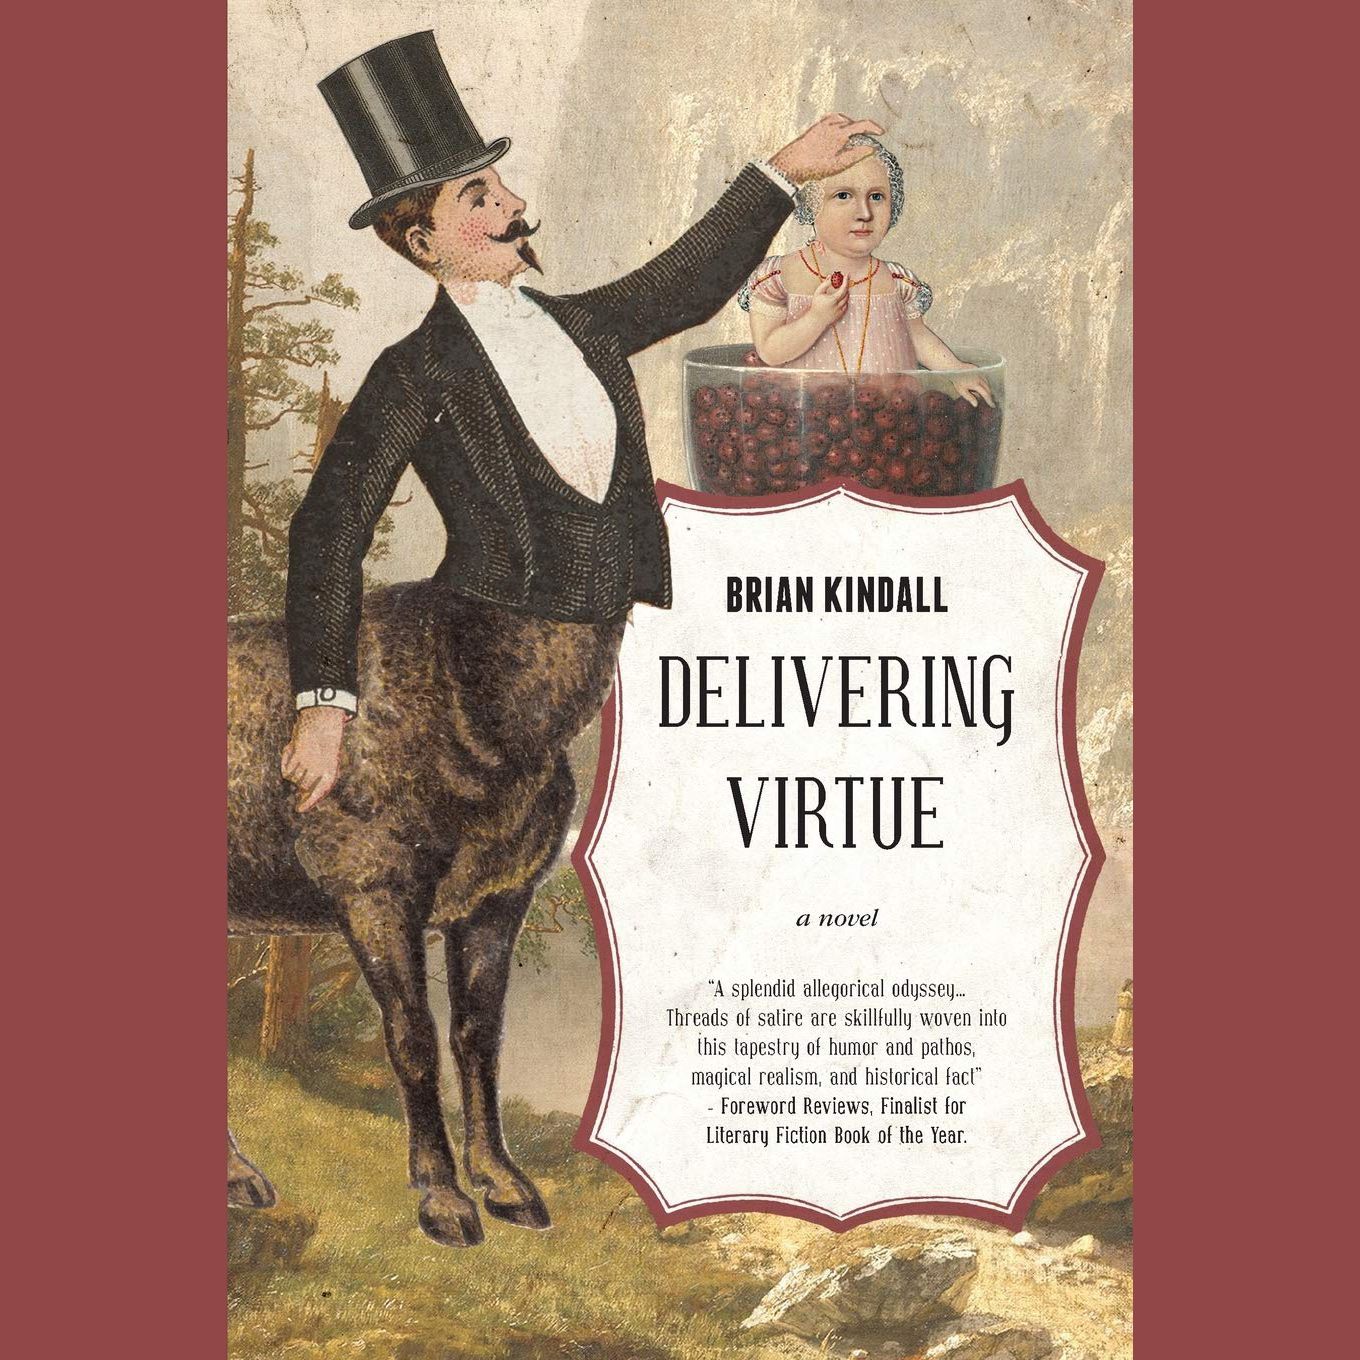 Delivering Virtue by Brian Kindall